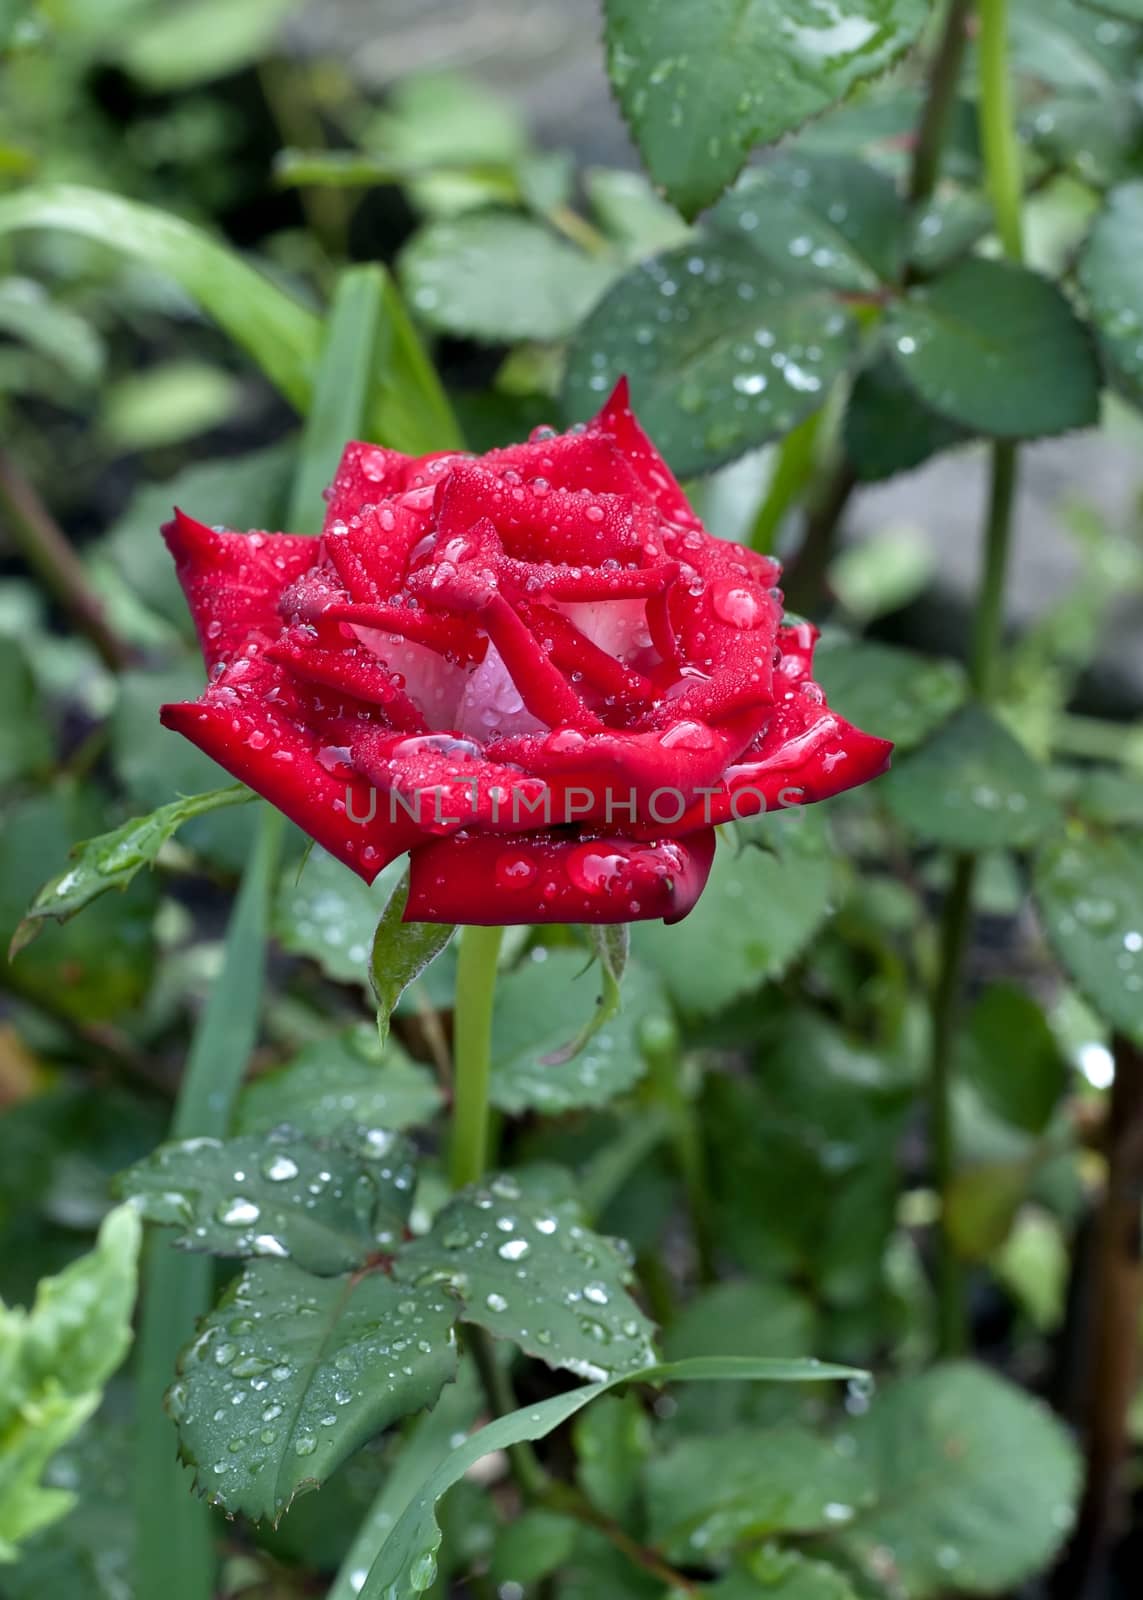 blooming scarlet rose with raindrops on its petals by valerypetr